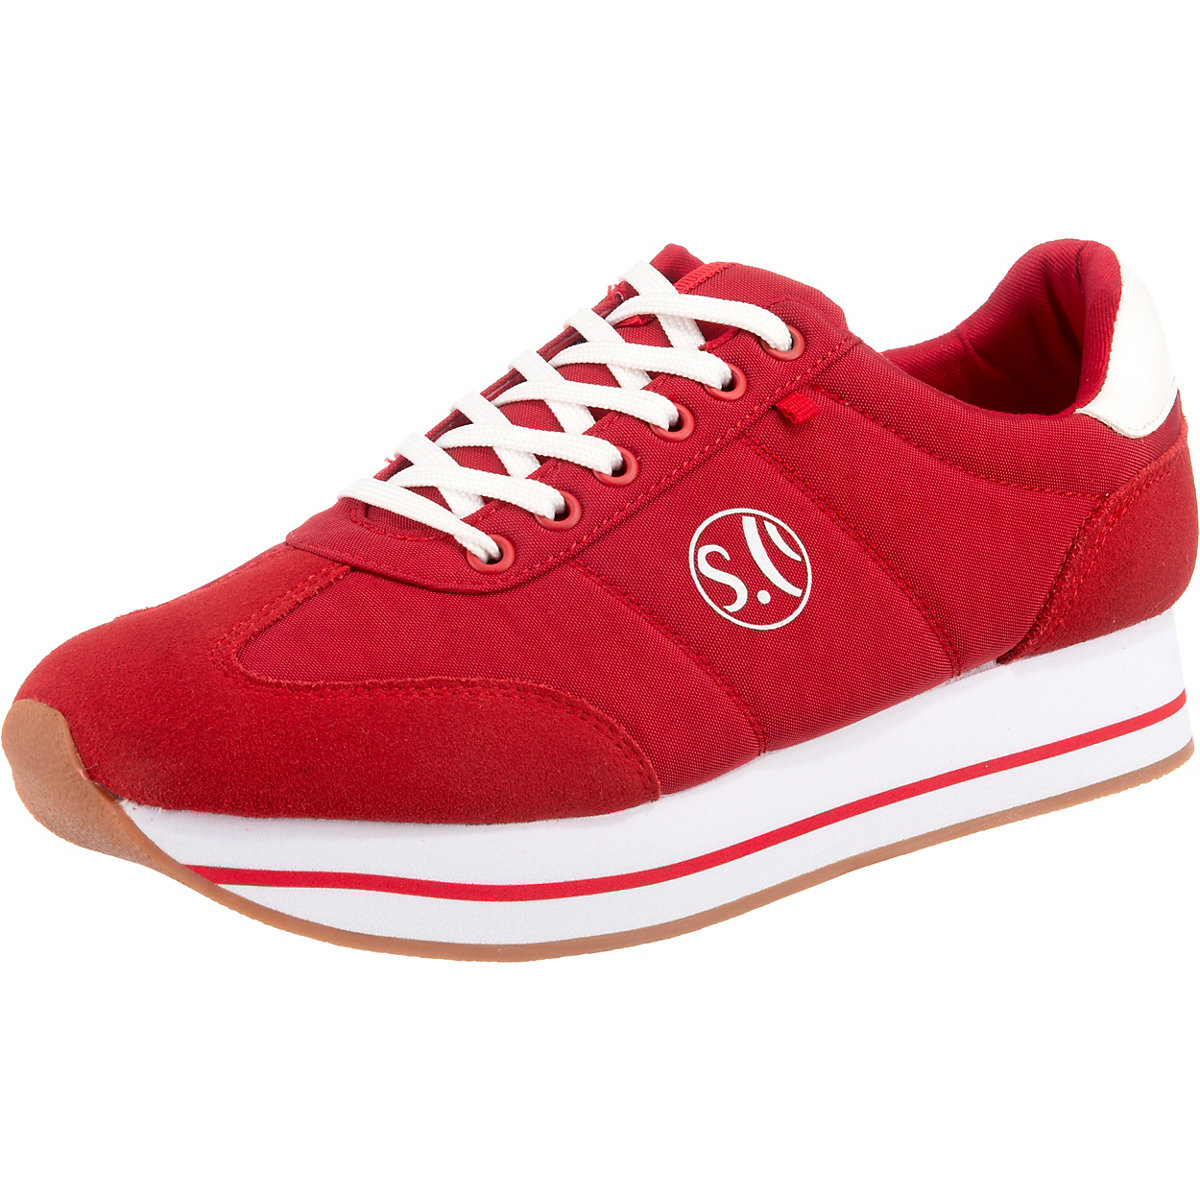 s.Oliver 500 Sneakers Low rot